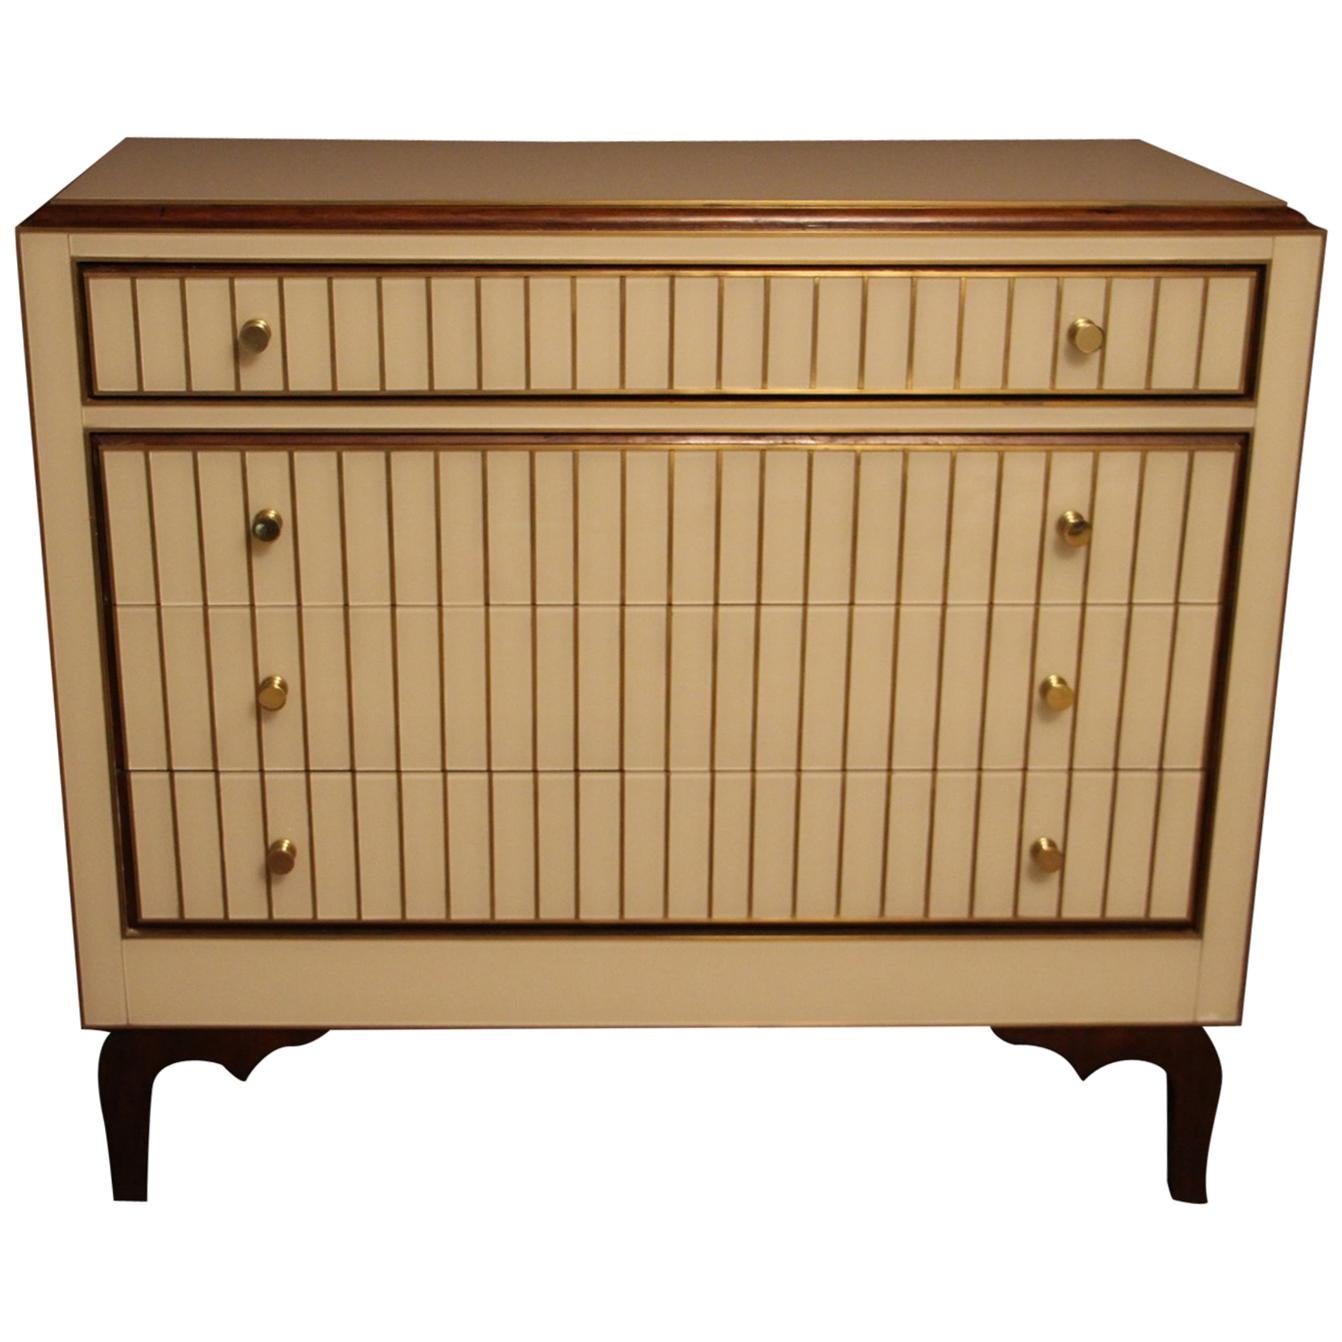 Chest of Drawers in Murano Glass and Brass Inlay, Beige and Golden Color